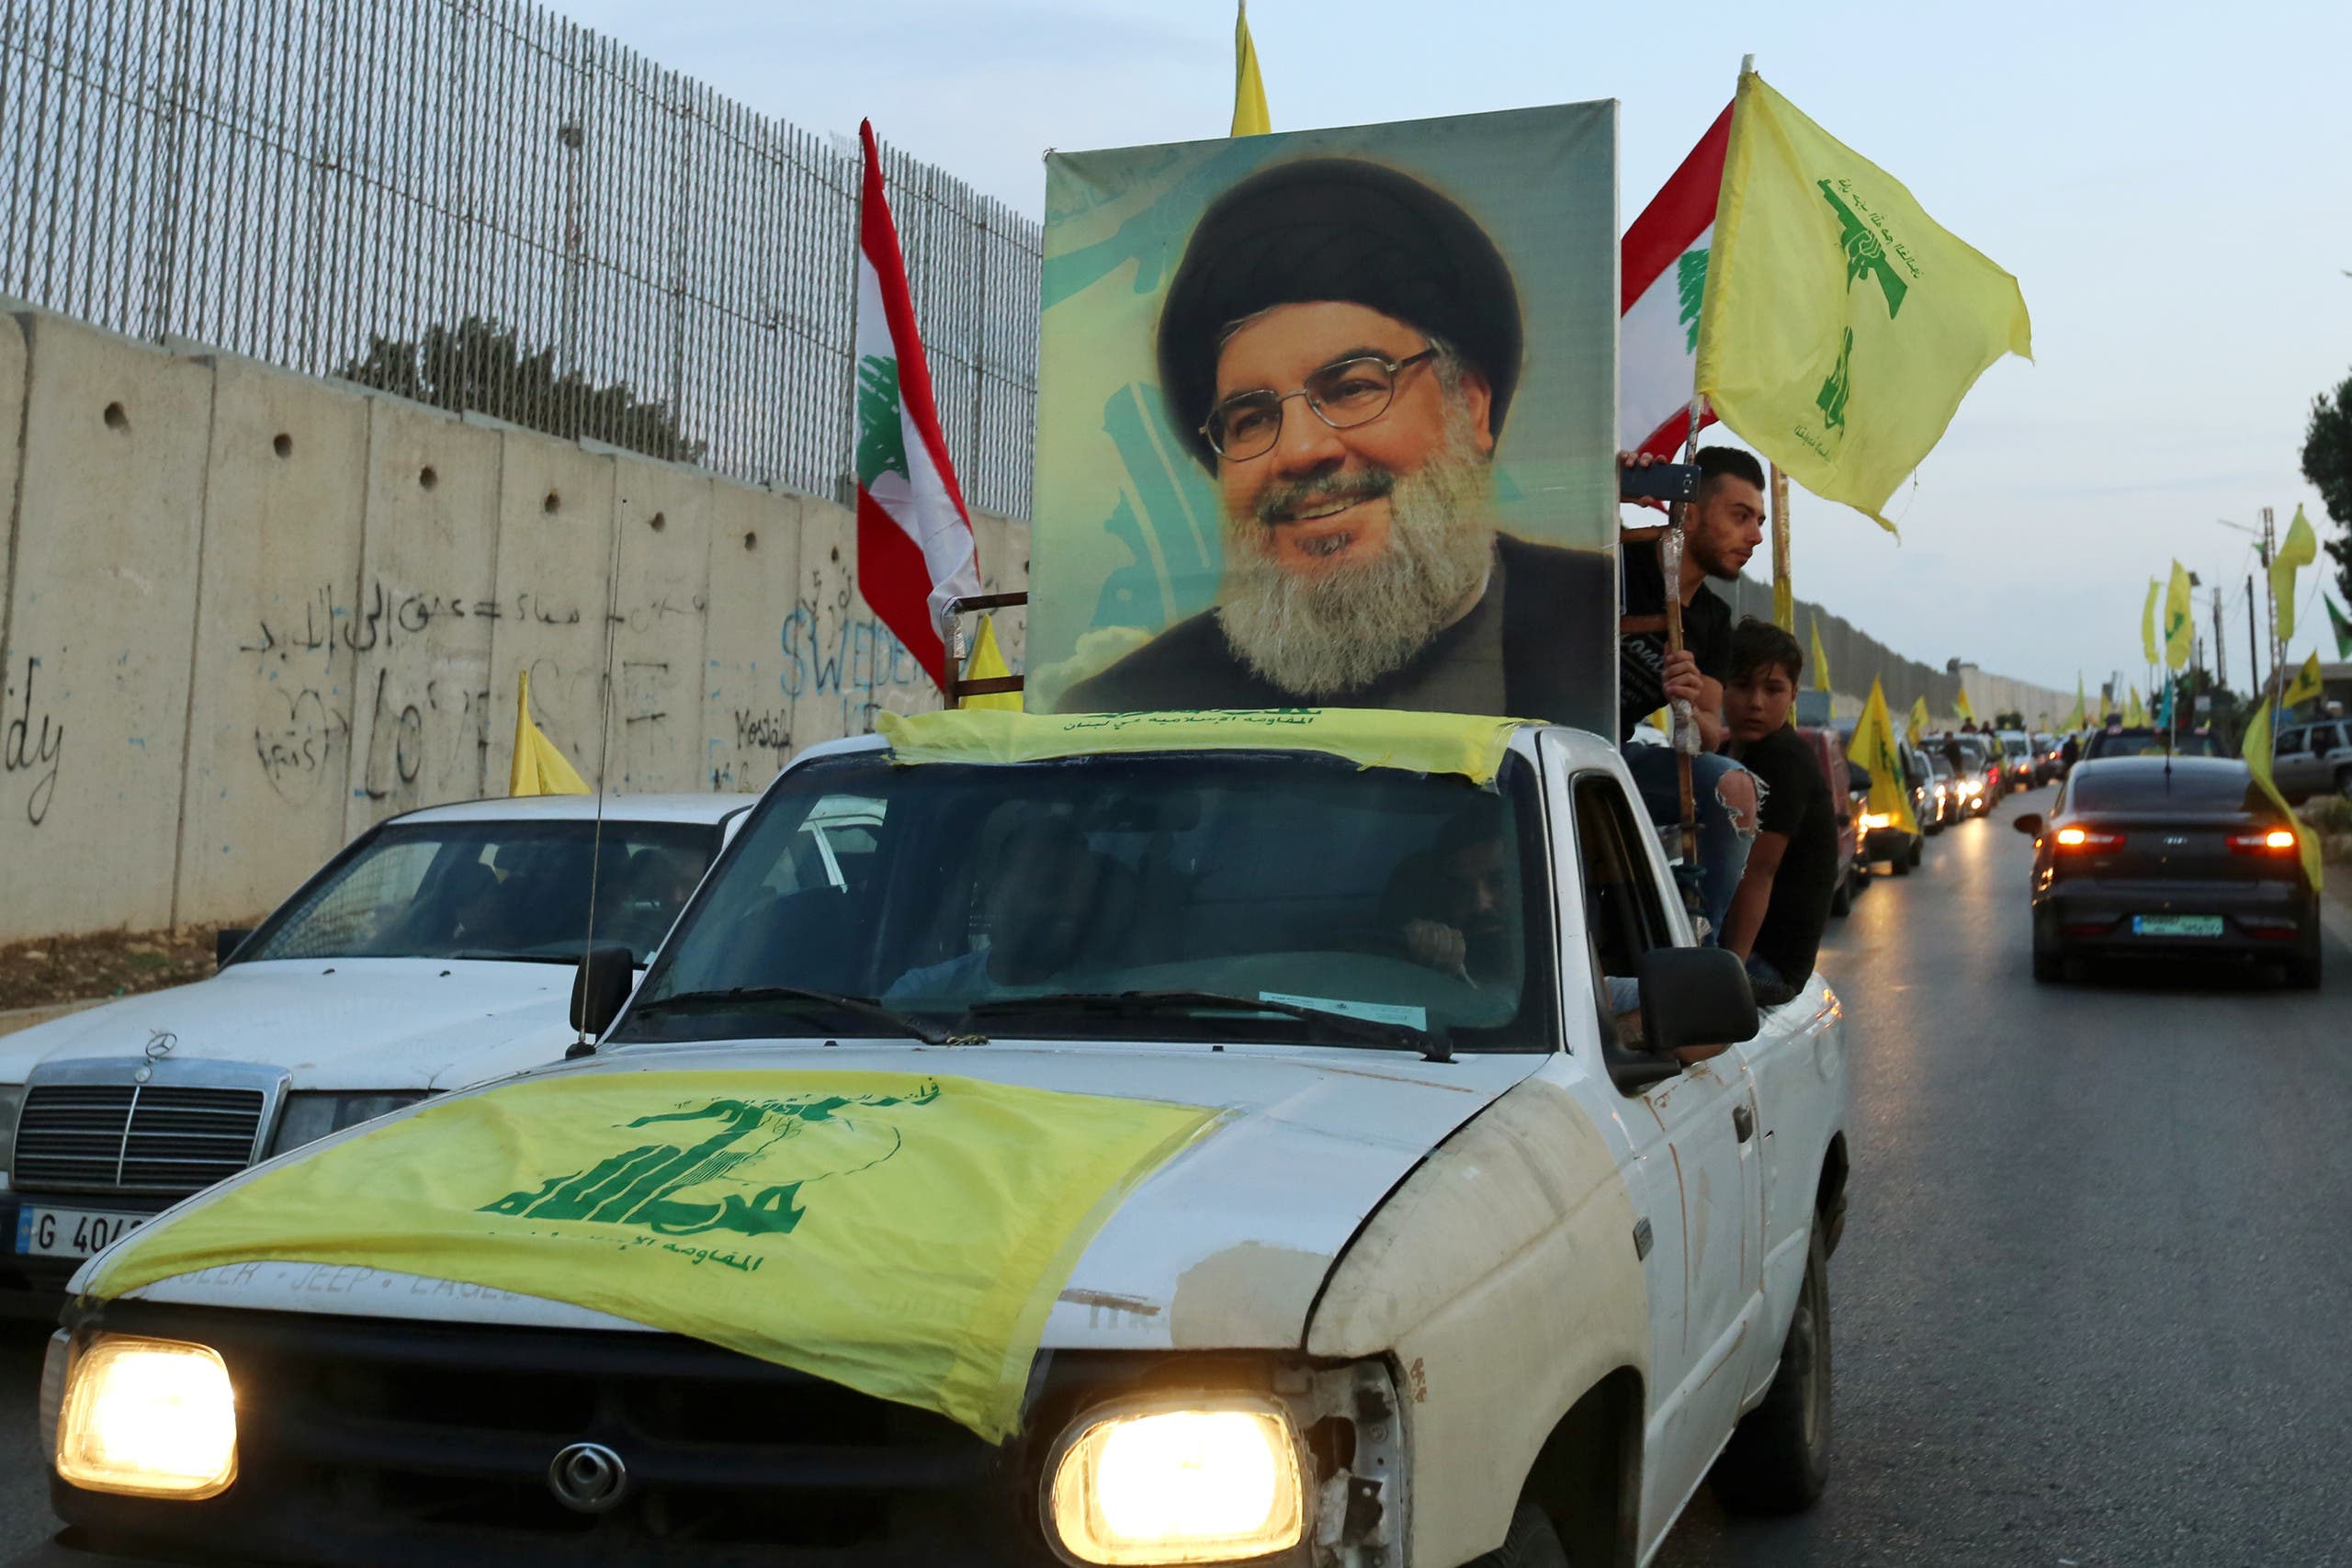 Supporters of Lebanon's Hezbollah leader Sayyed Hassan Nasrallah ride in a vehicle decorated with Hezbollah and Lebanese flags and a picture of him, as part of a convoy in Lebanon. (Reuters)